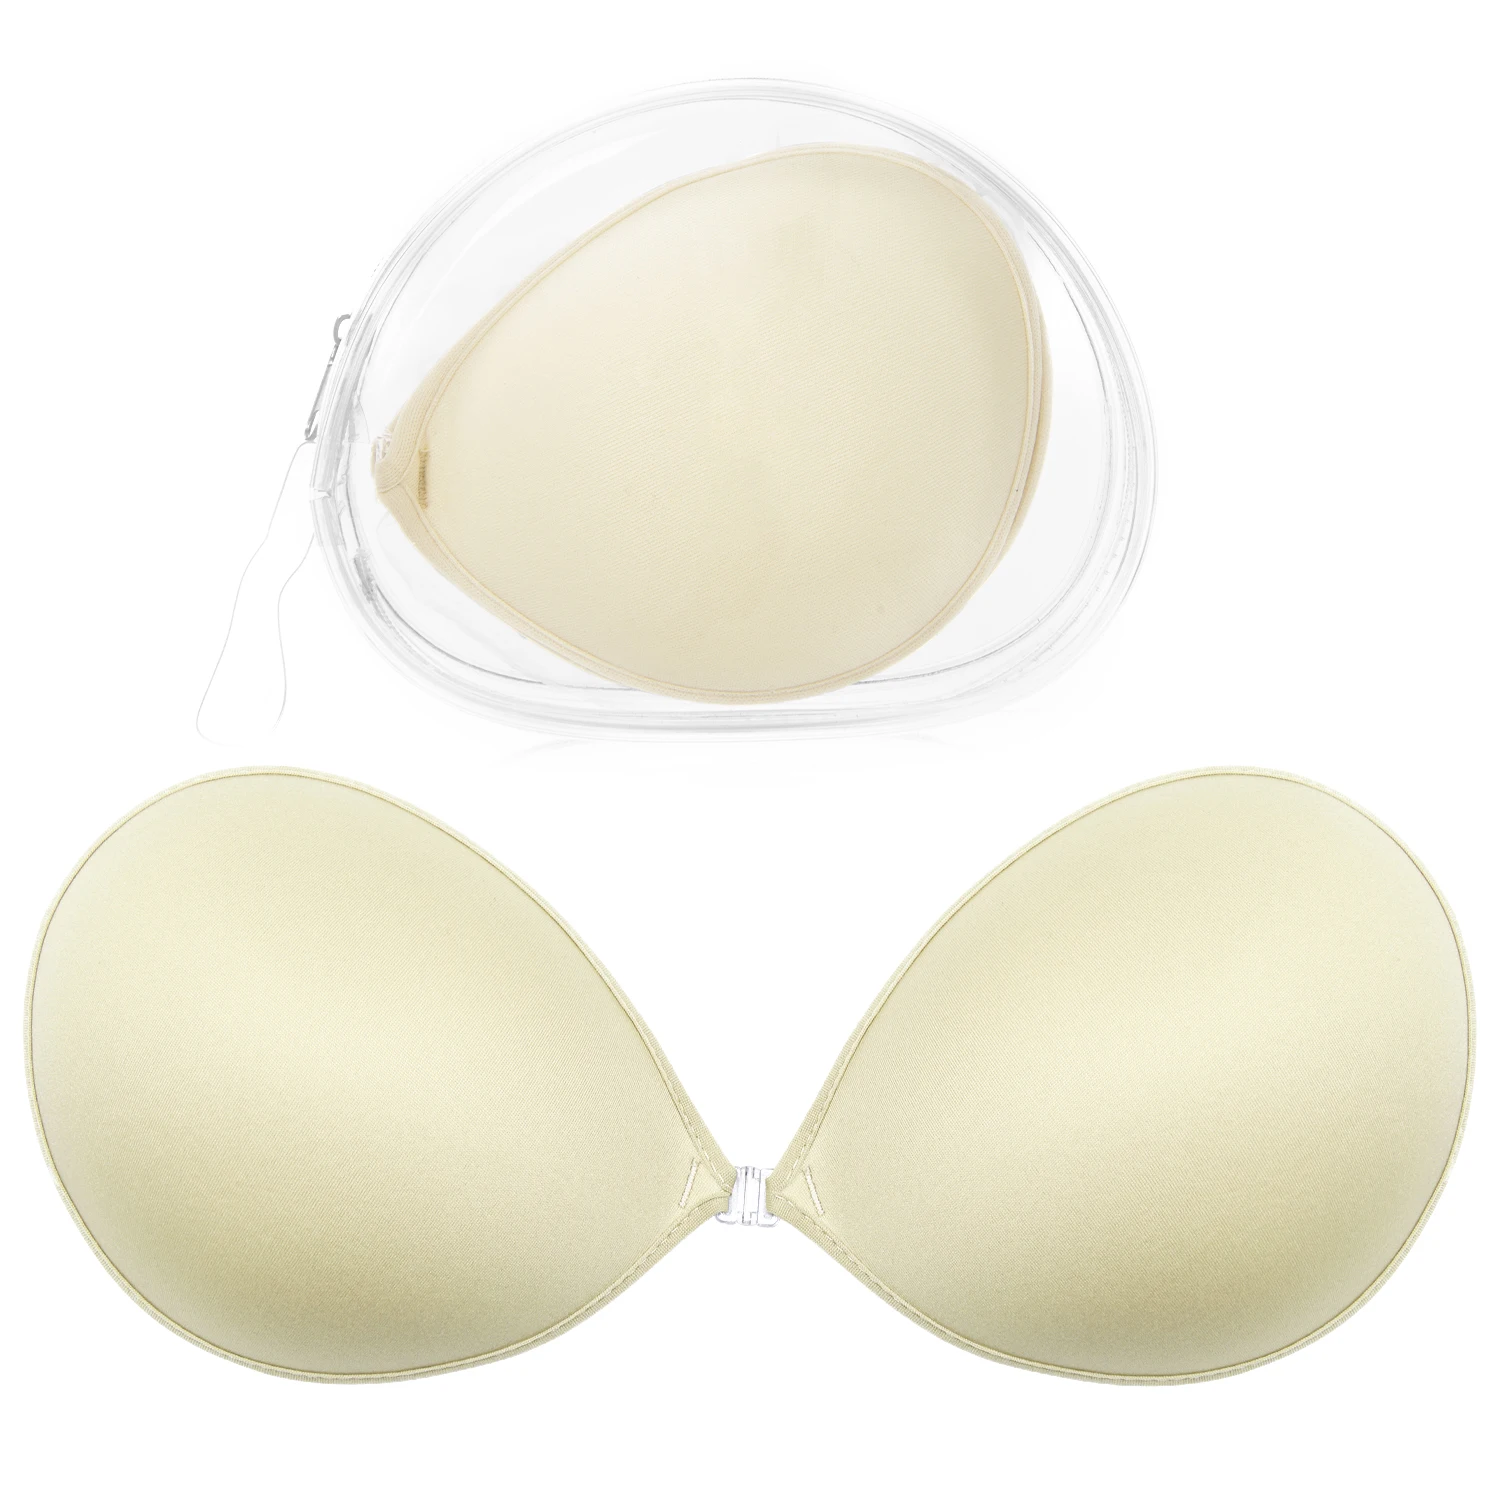 Wingslove Adhesive Bra Reusable Strapless Self Silicone Push-up Invisible  Sticky Backless Naked Back Nipple Pad - Bras - AliExpress